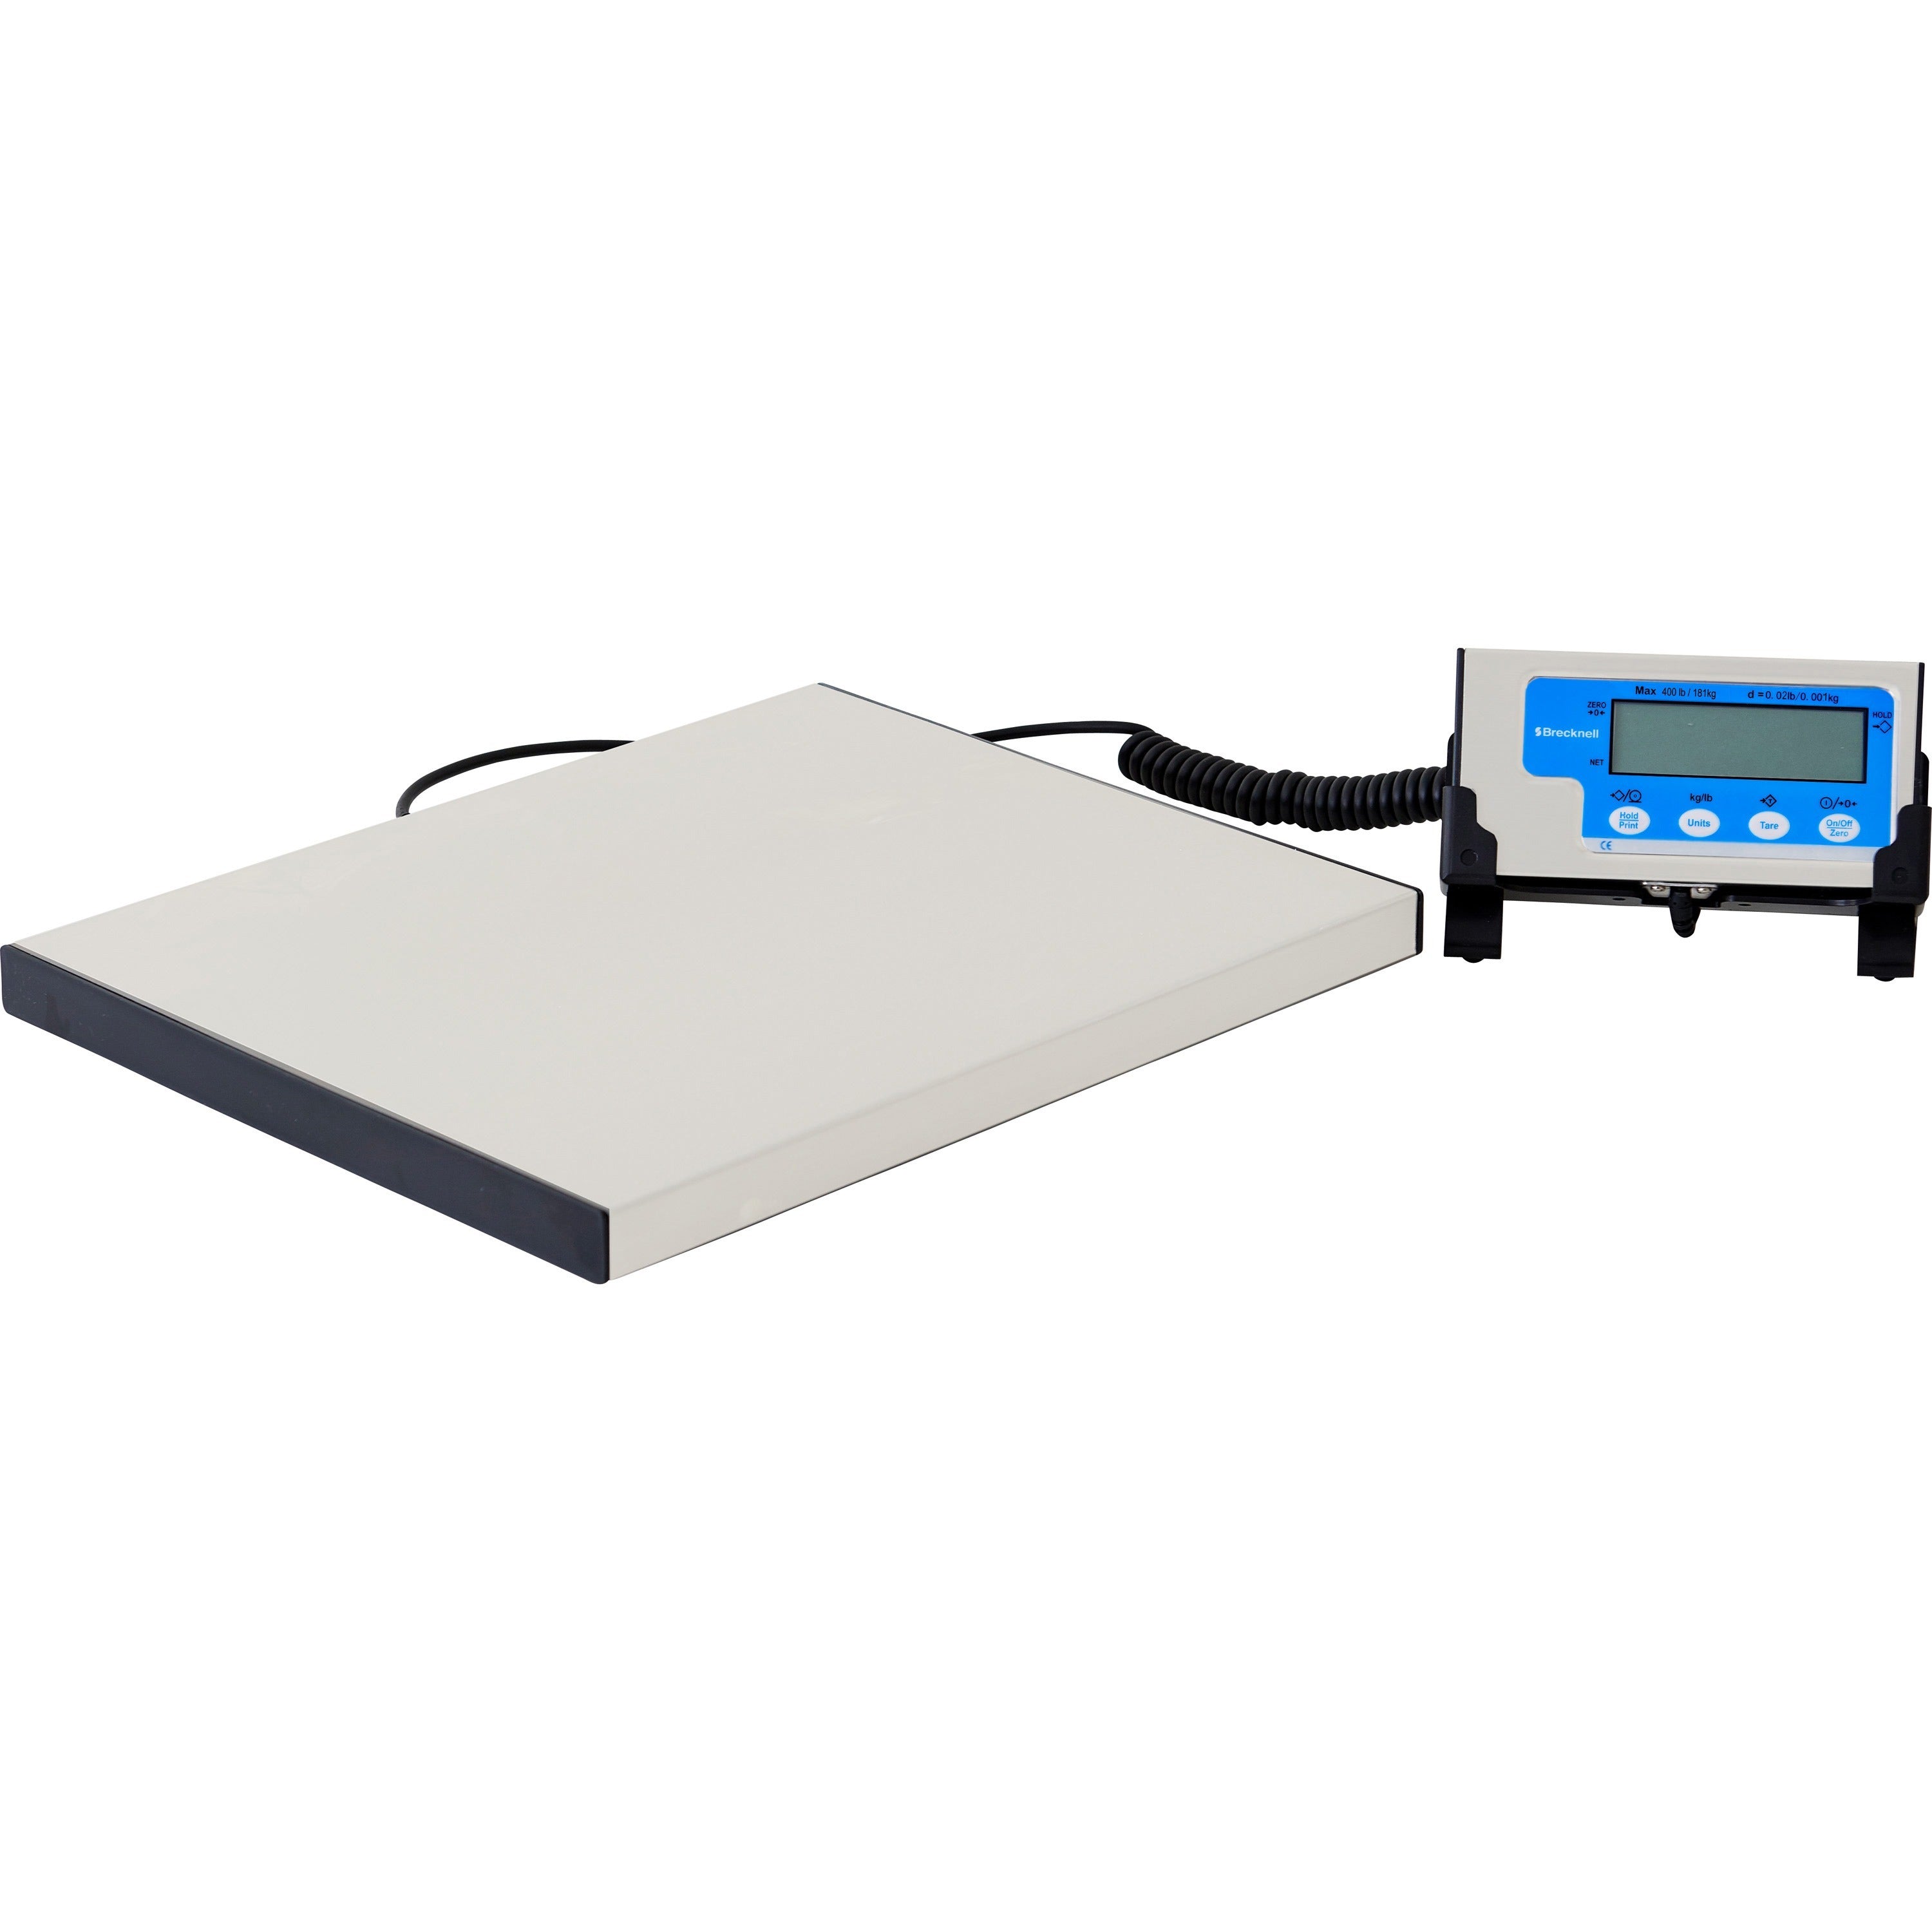 Brecknell Portable Shipping Scale - 400 lb / 181 kg Maximum Weight Capacity - White - 